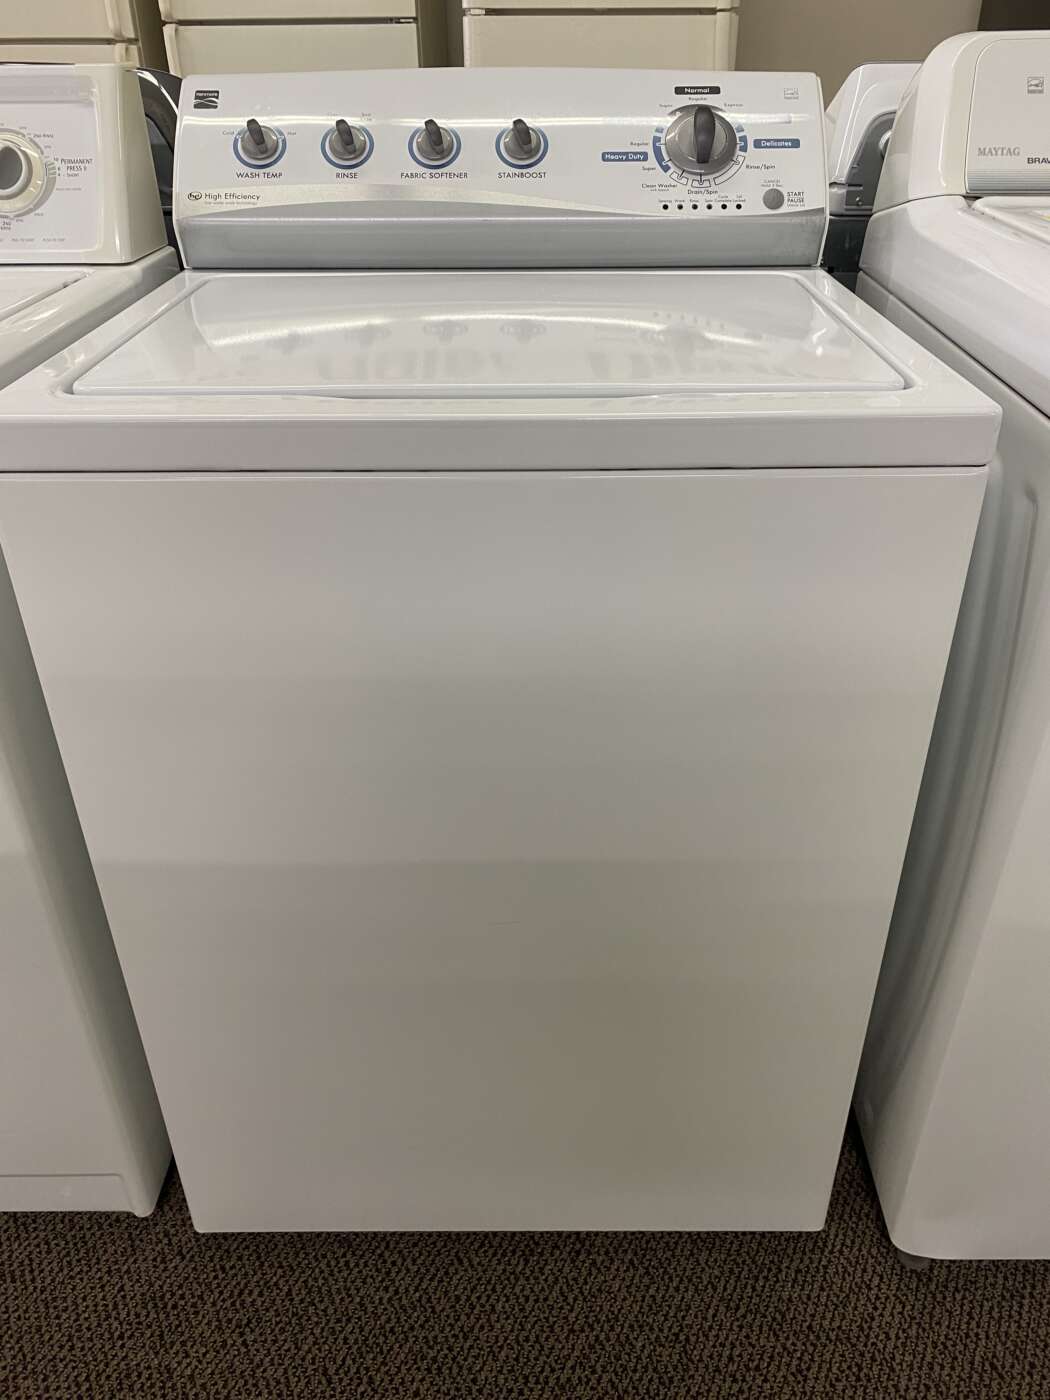 Reconditioned KENMORE 4.0 Cu. Ft. Top-Load H/E Washer – White